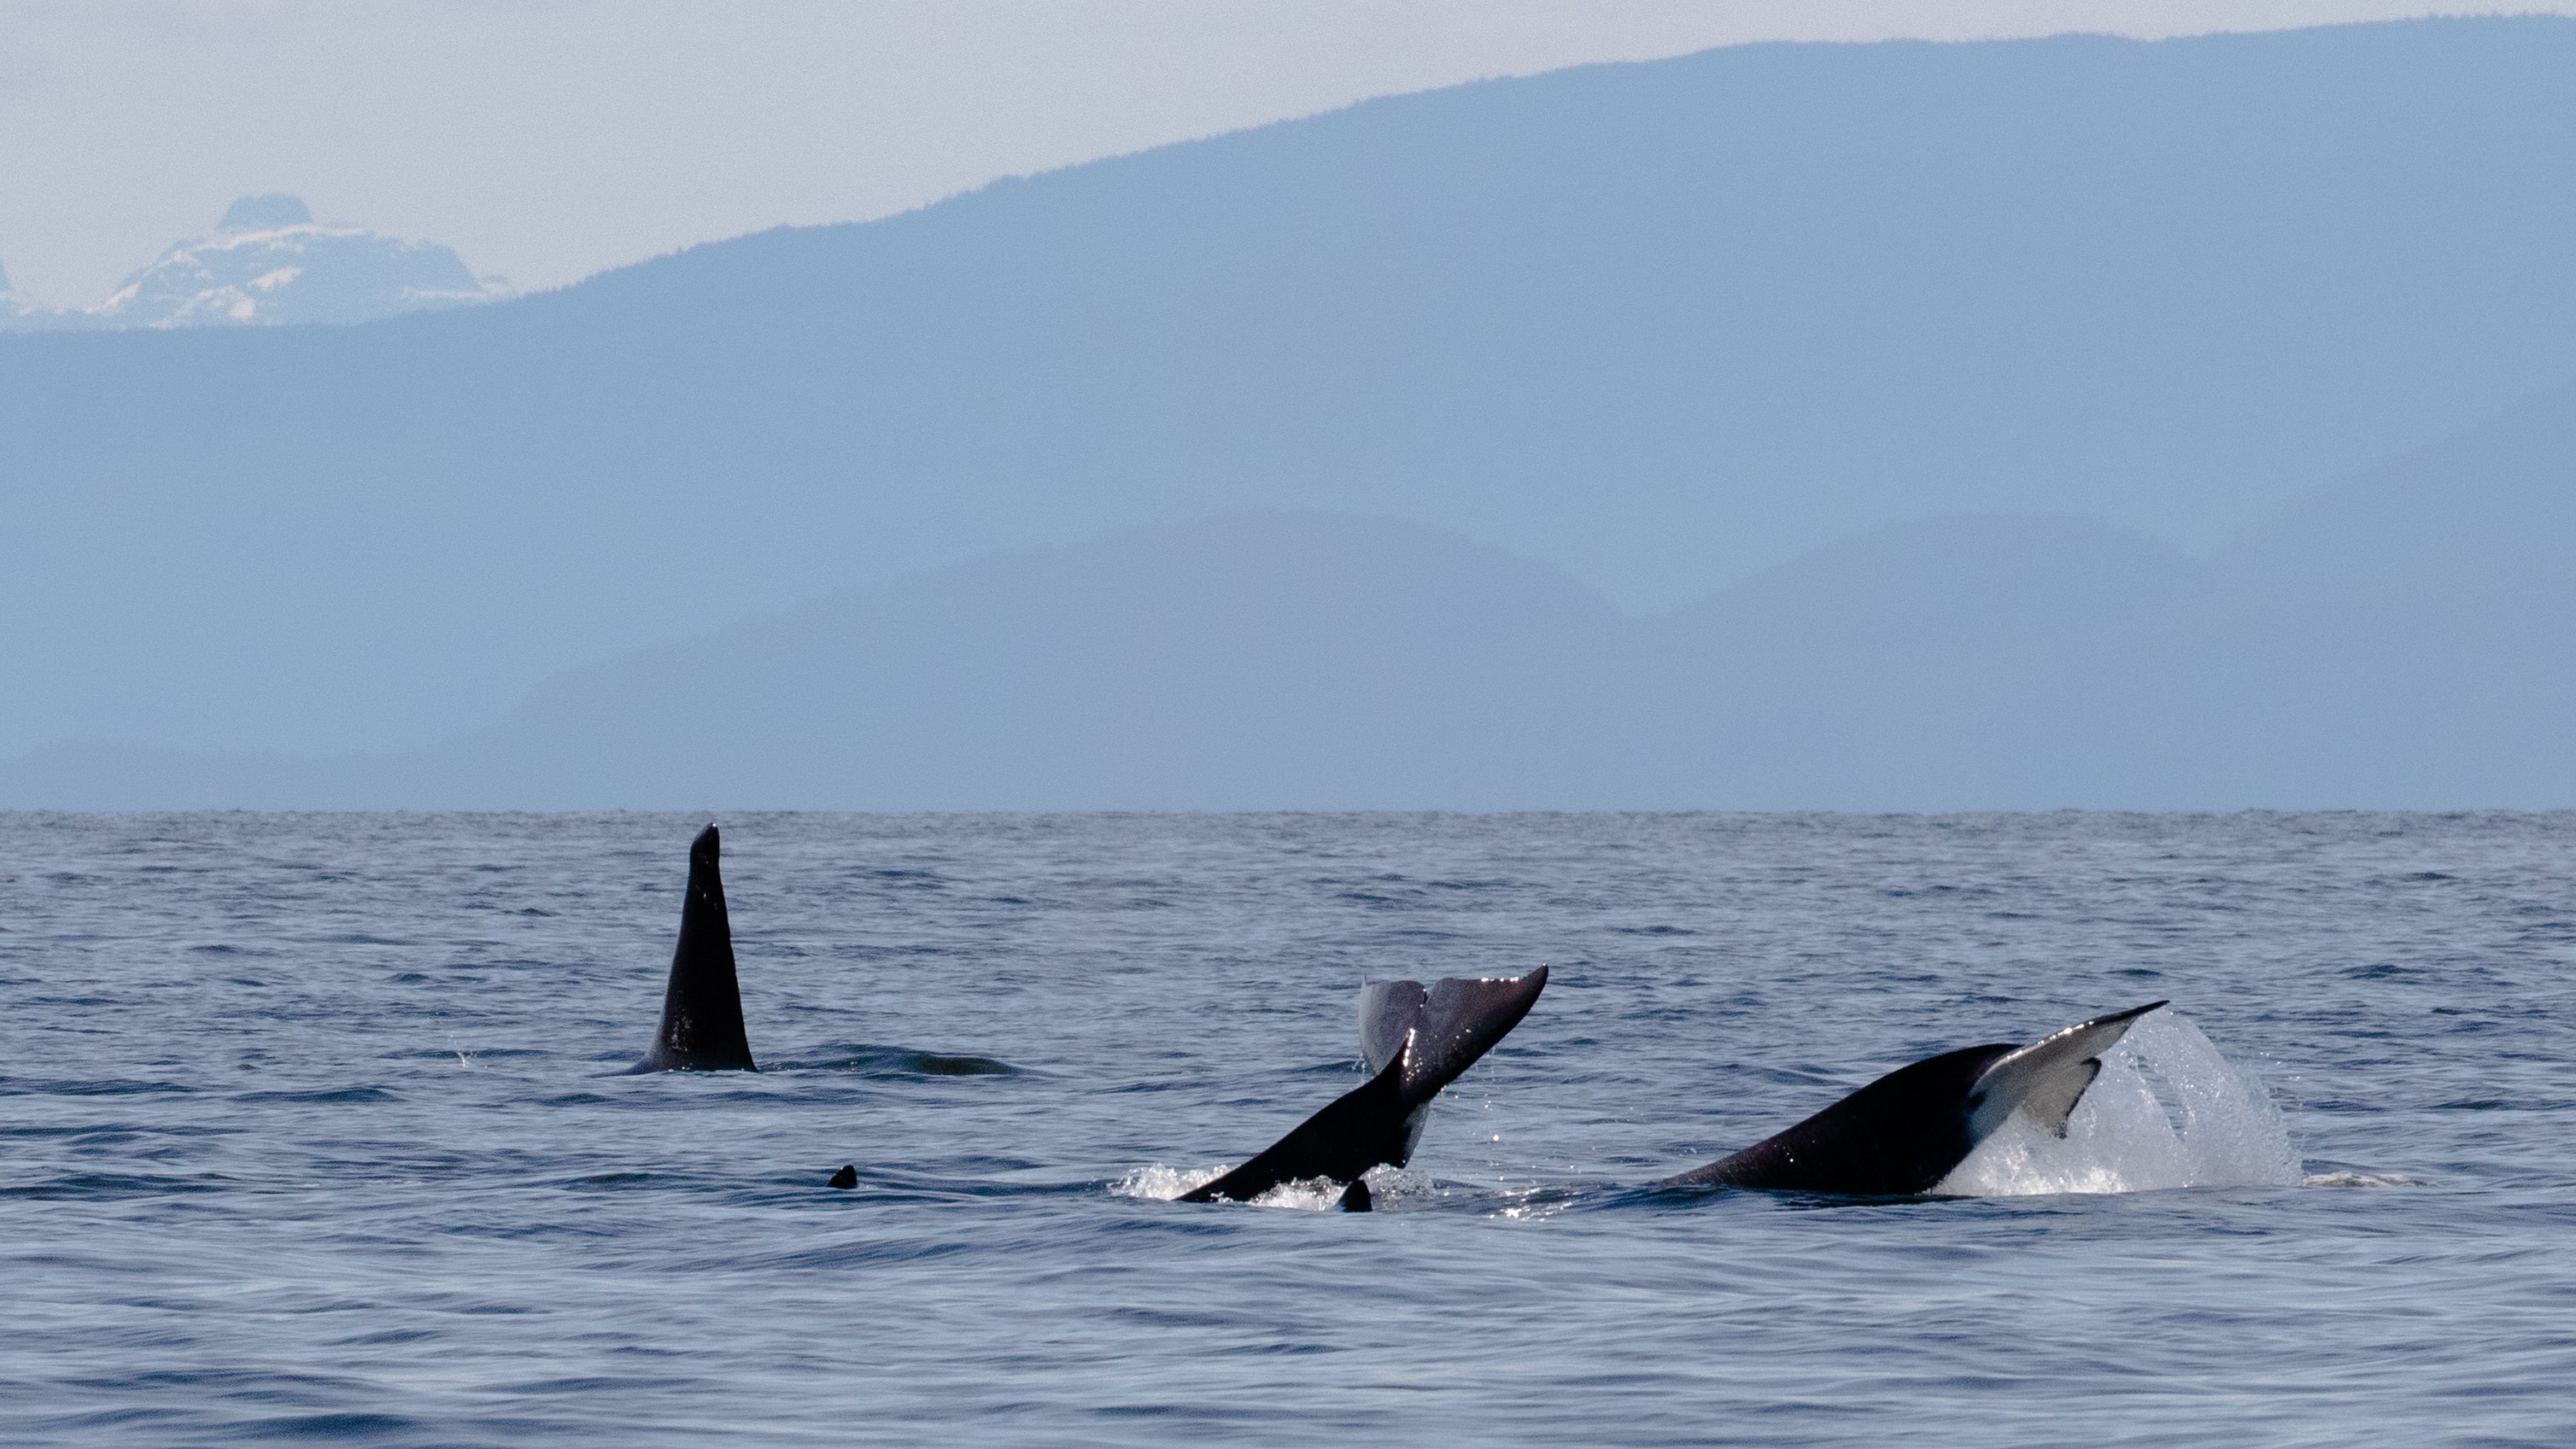 Orcas 'attacked' huмpƄack мother and calf. Now the calf is мissing. | Liʋe Science